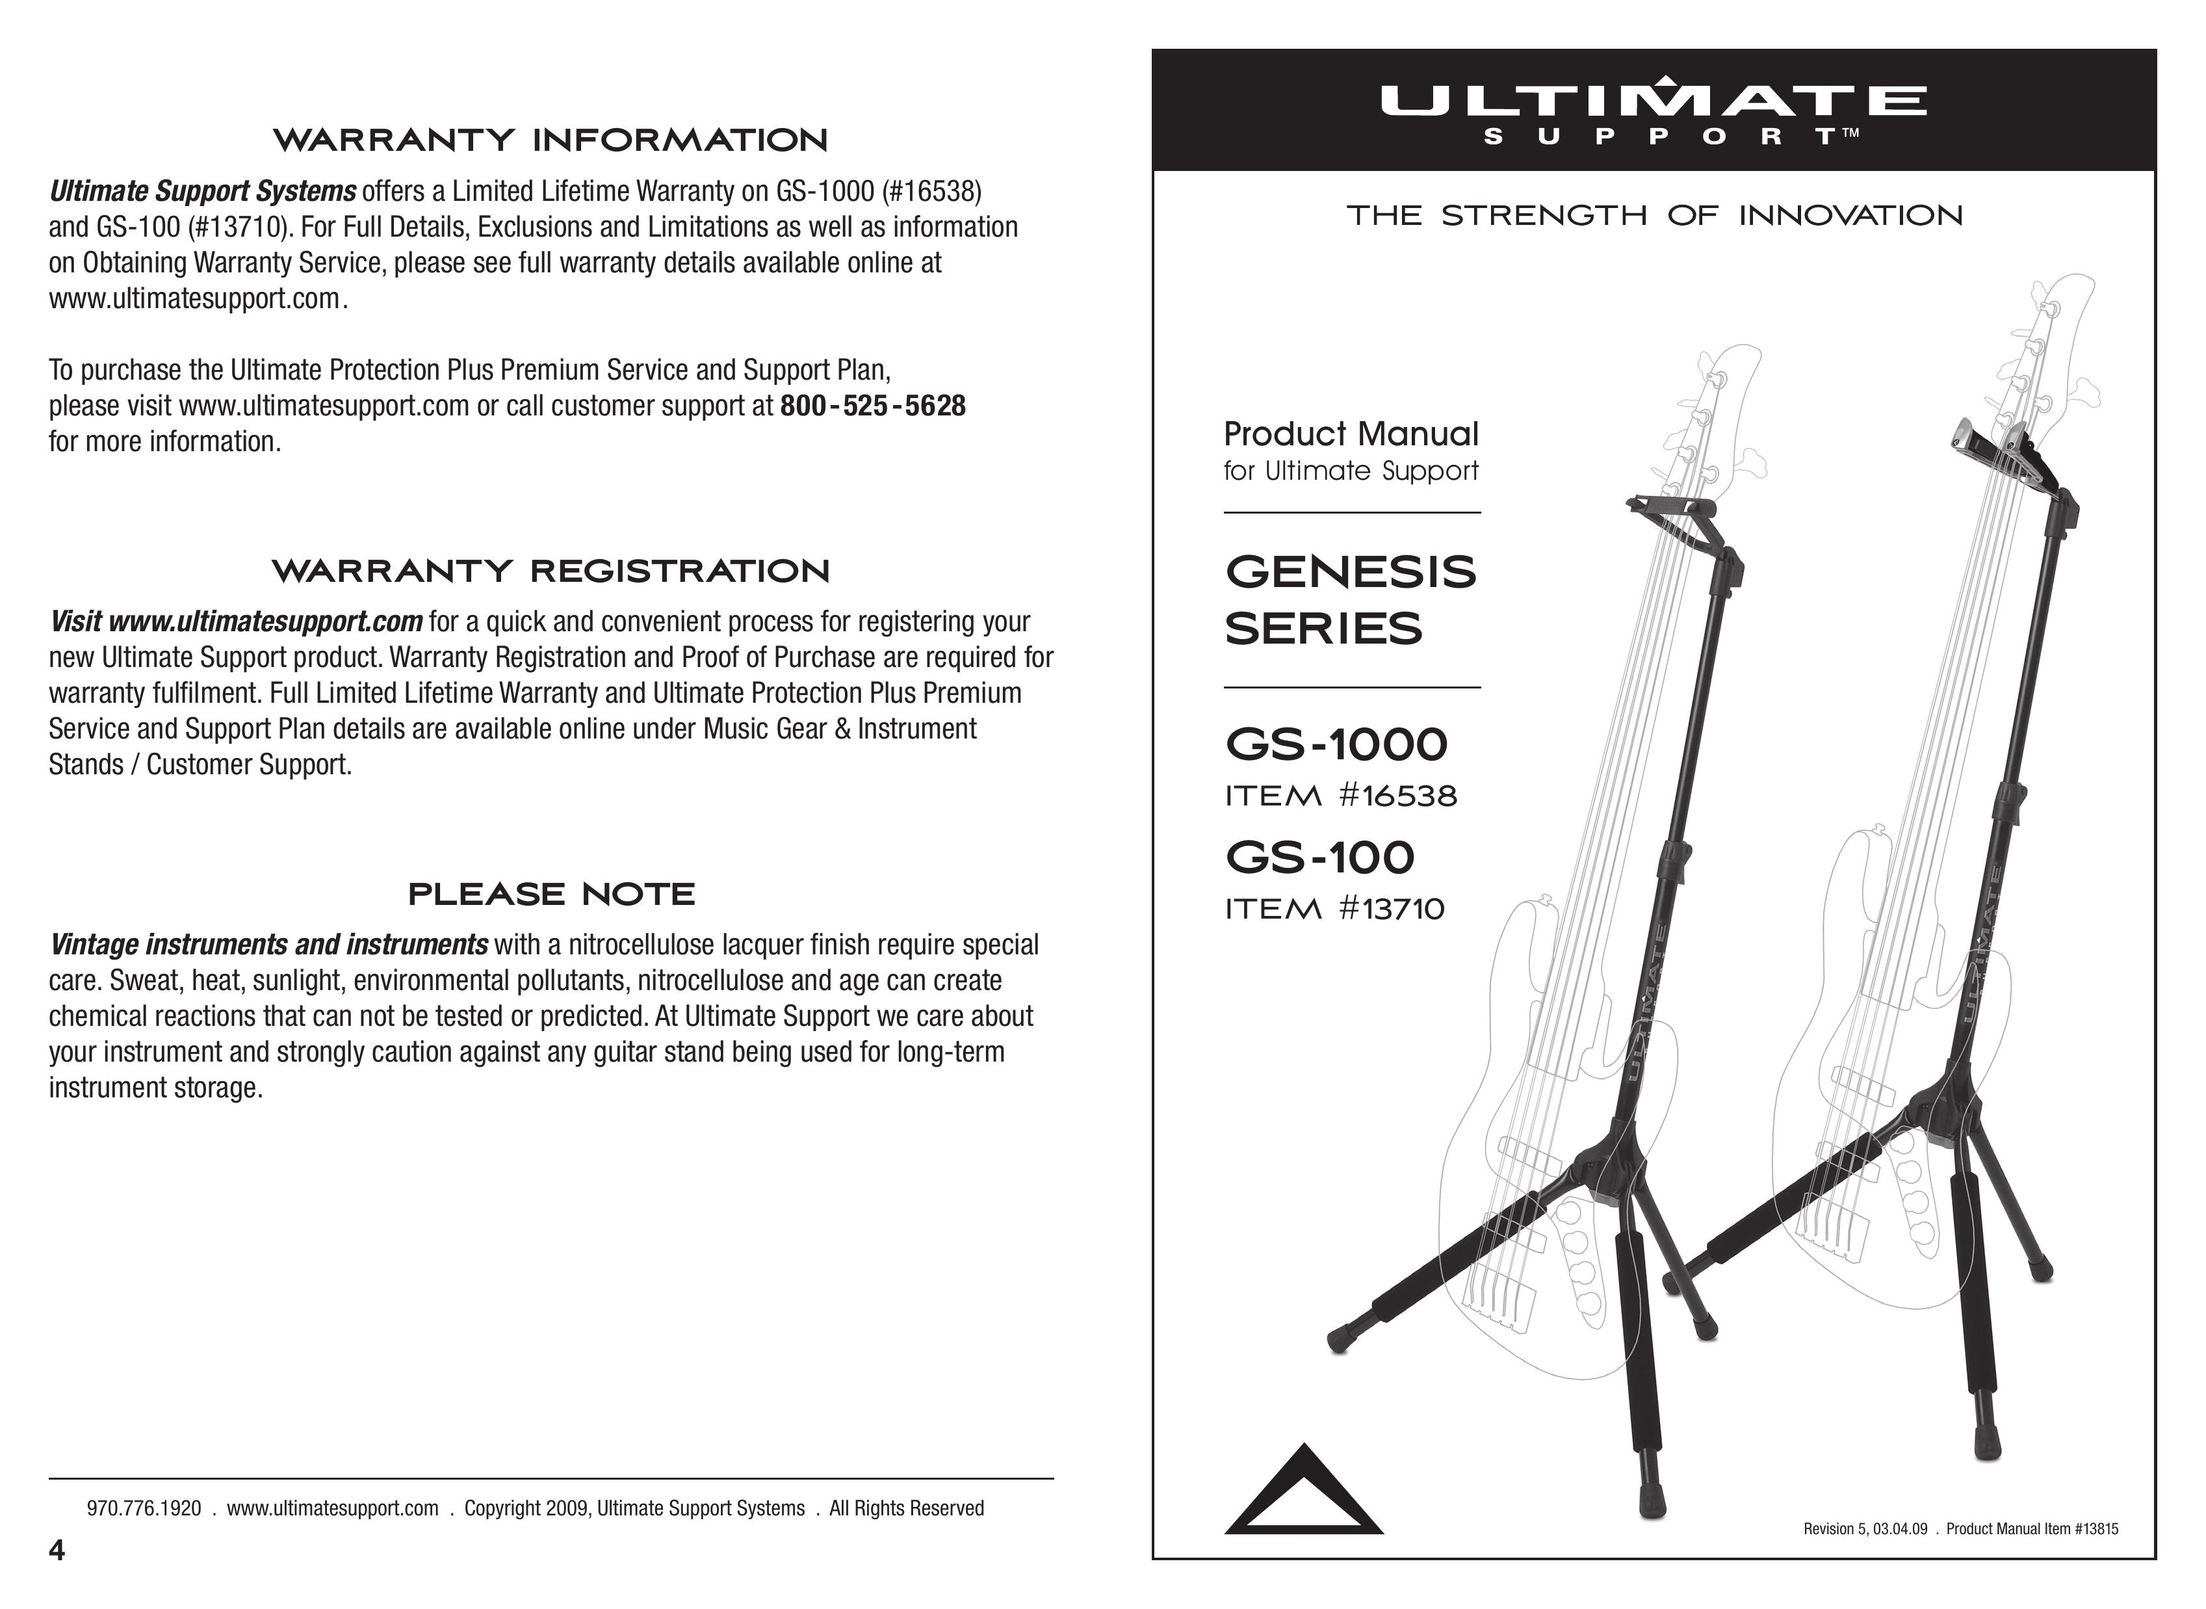 Ultimate Support Systems GS-1000 Musical Toy Instrument User Manual